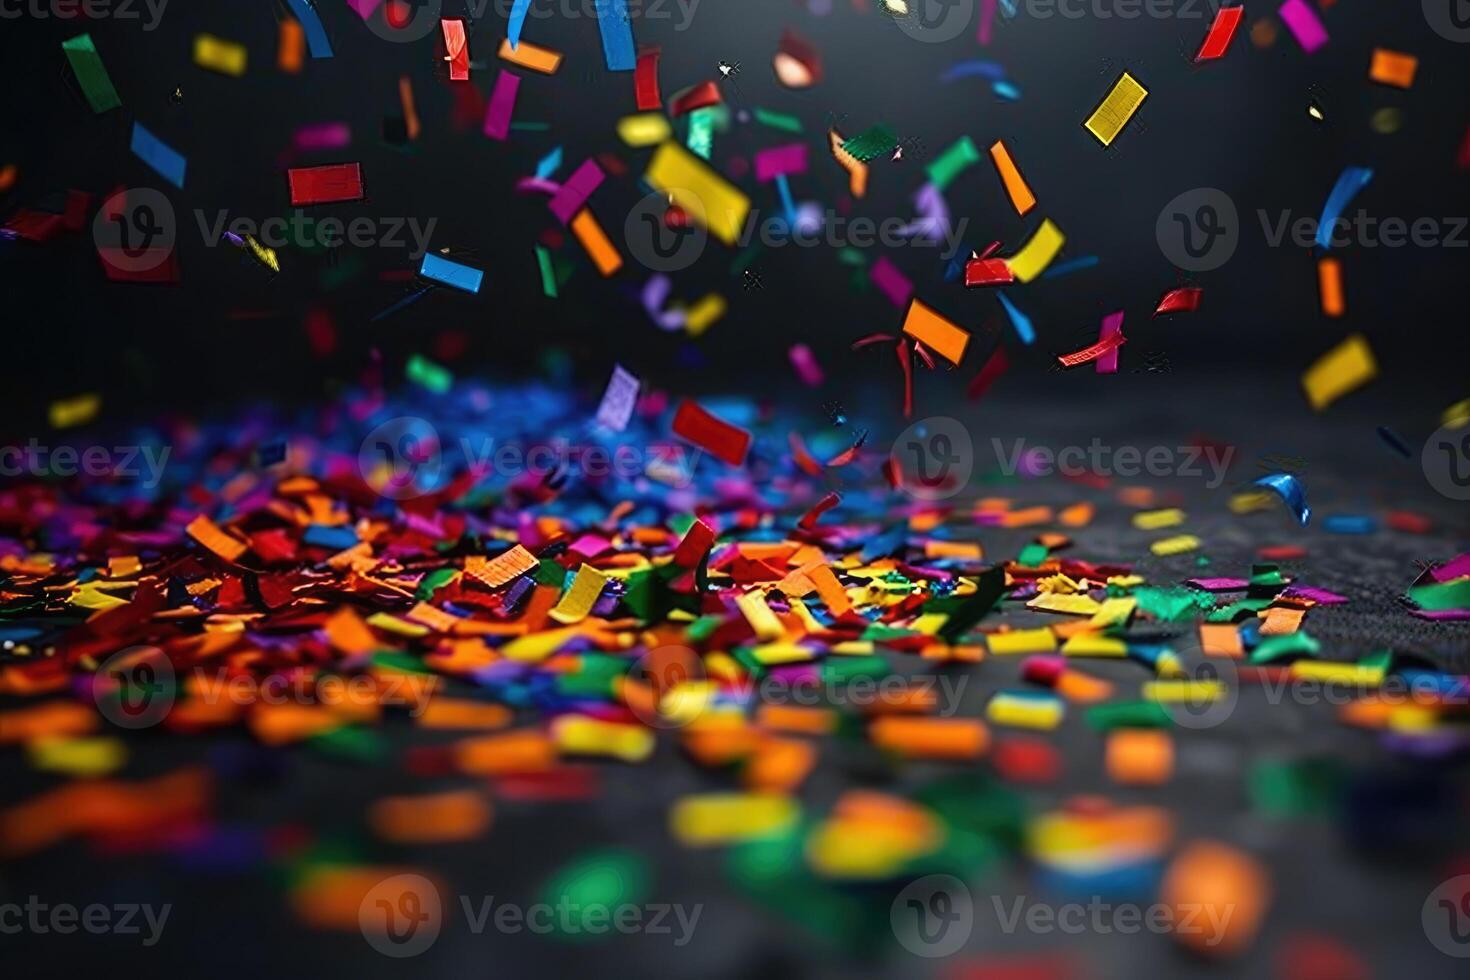 AI generated papers confetti falling in the bright blue sky professional photography background photo